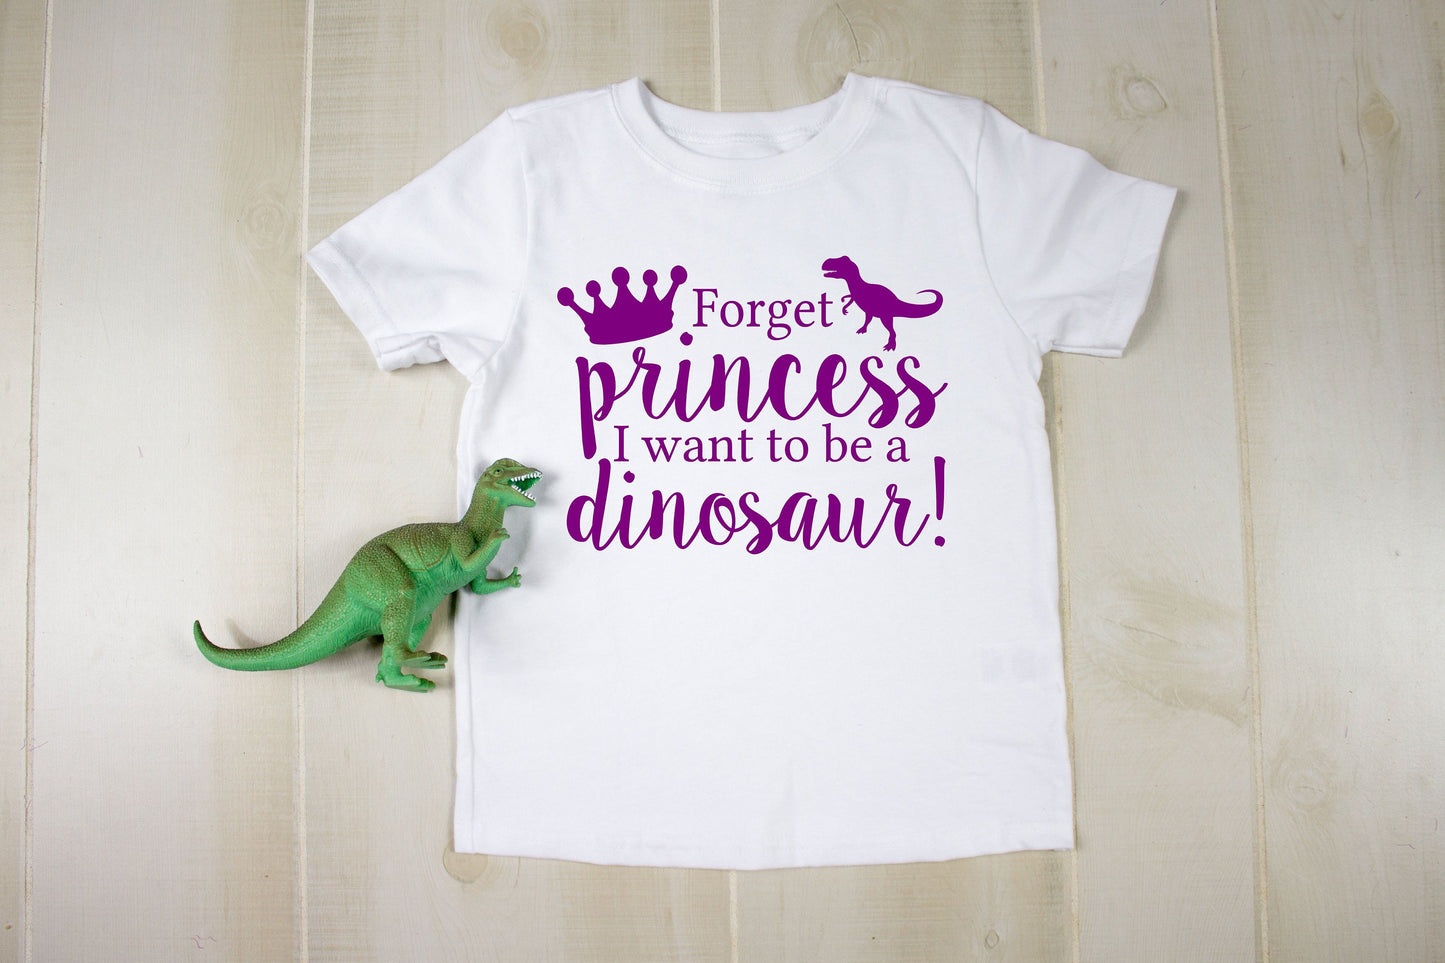 Forget Princess I Want to Be a Dinosaur Infant Toddler or Girls Shirt - Smart Girl Shirt - Dinosaur Girls Shirt - Dinosaur Birthday Party